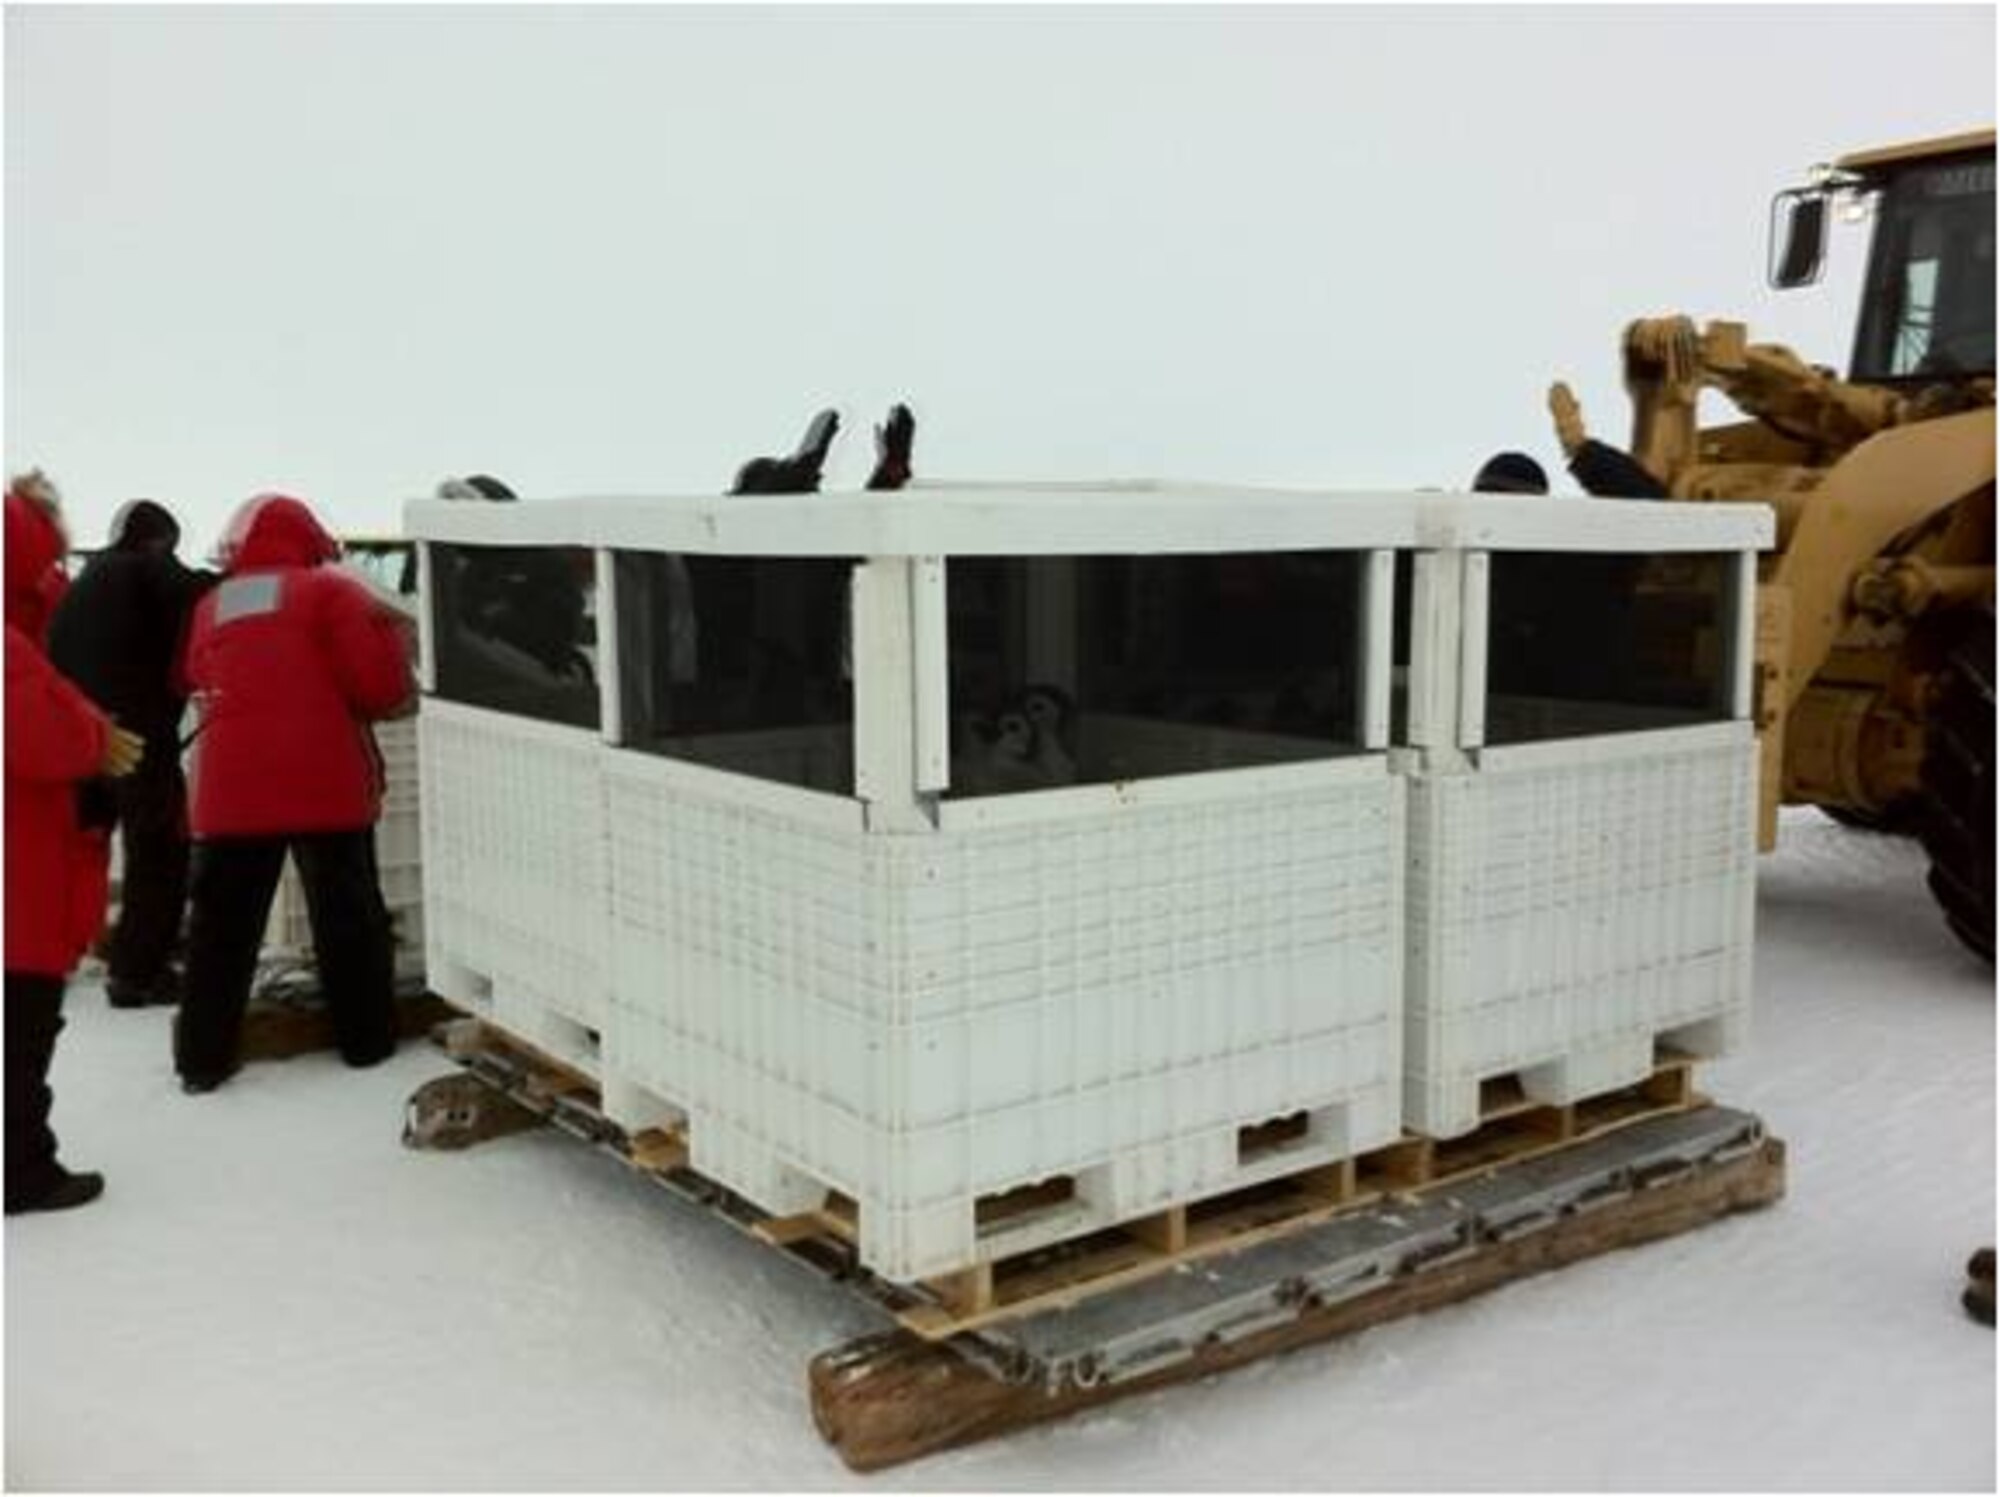 After hours of coordination between Team McChord leadership and the National Science Foundation, the decision was made to transport ten juvenile Emperor penguins on Dec. 5, 2011, from a remote location in Antarctica to Seaworld in San Diego, Calif. (U.S. Air Force courtesy photo)